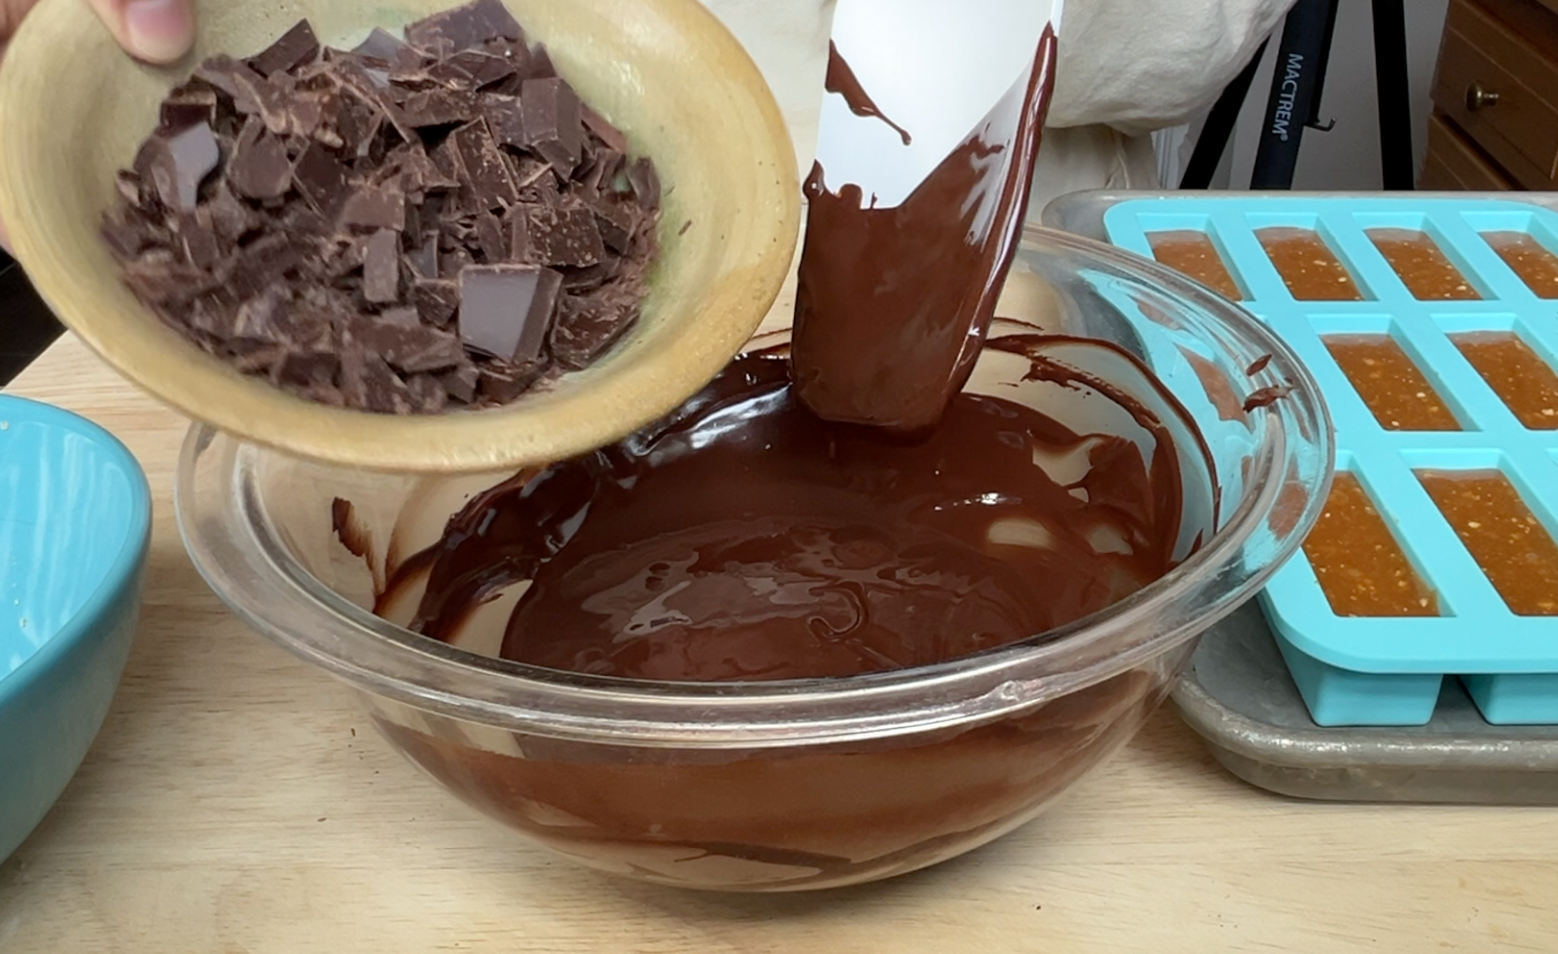 Adding chopped chocolate to melted chocolate